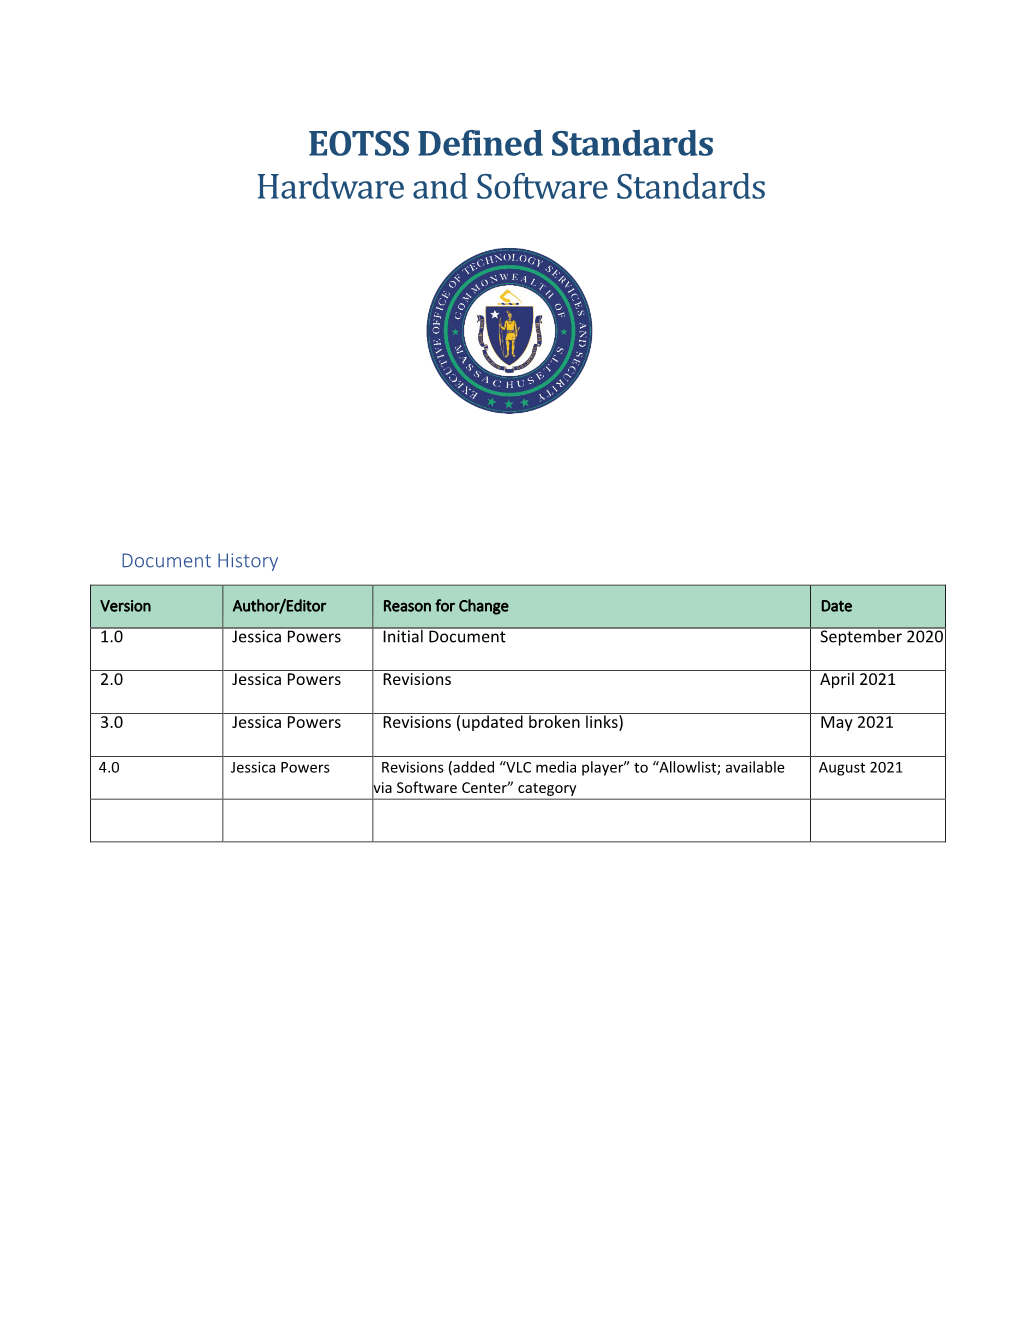 EOTSS Hardware and Software Standards